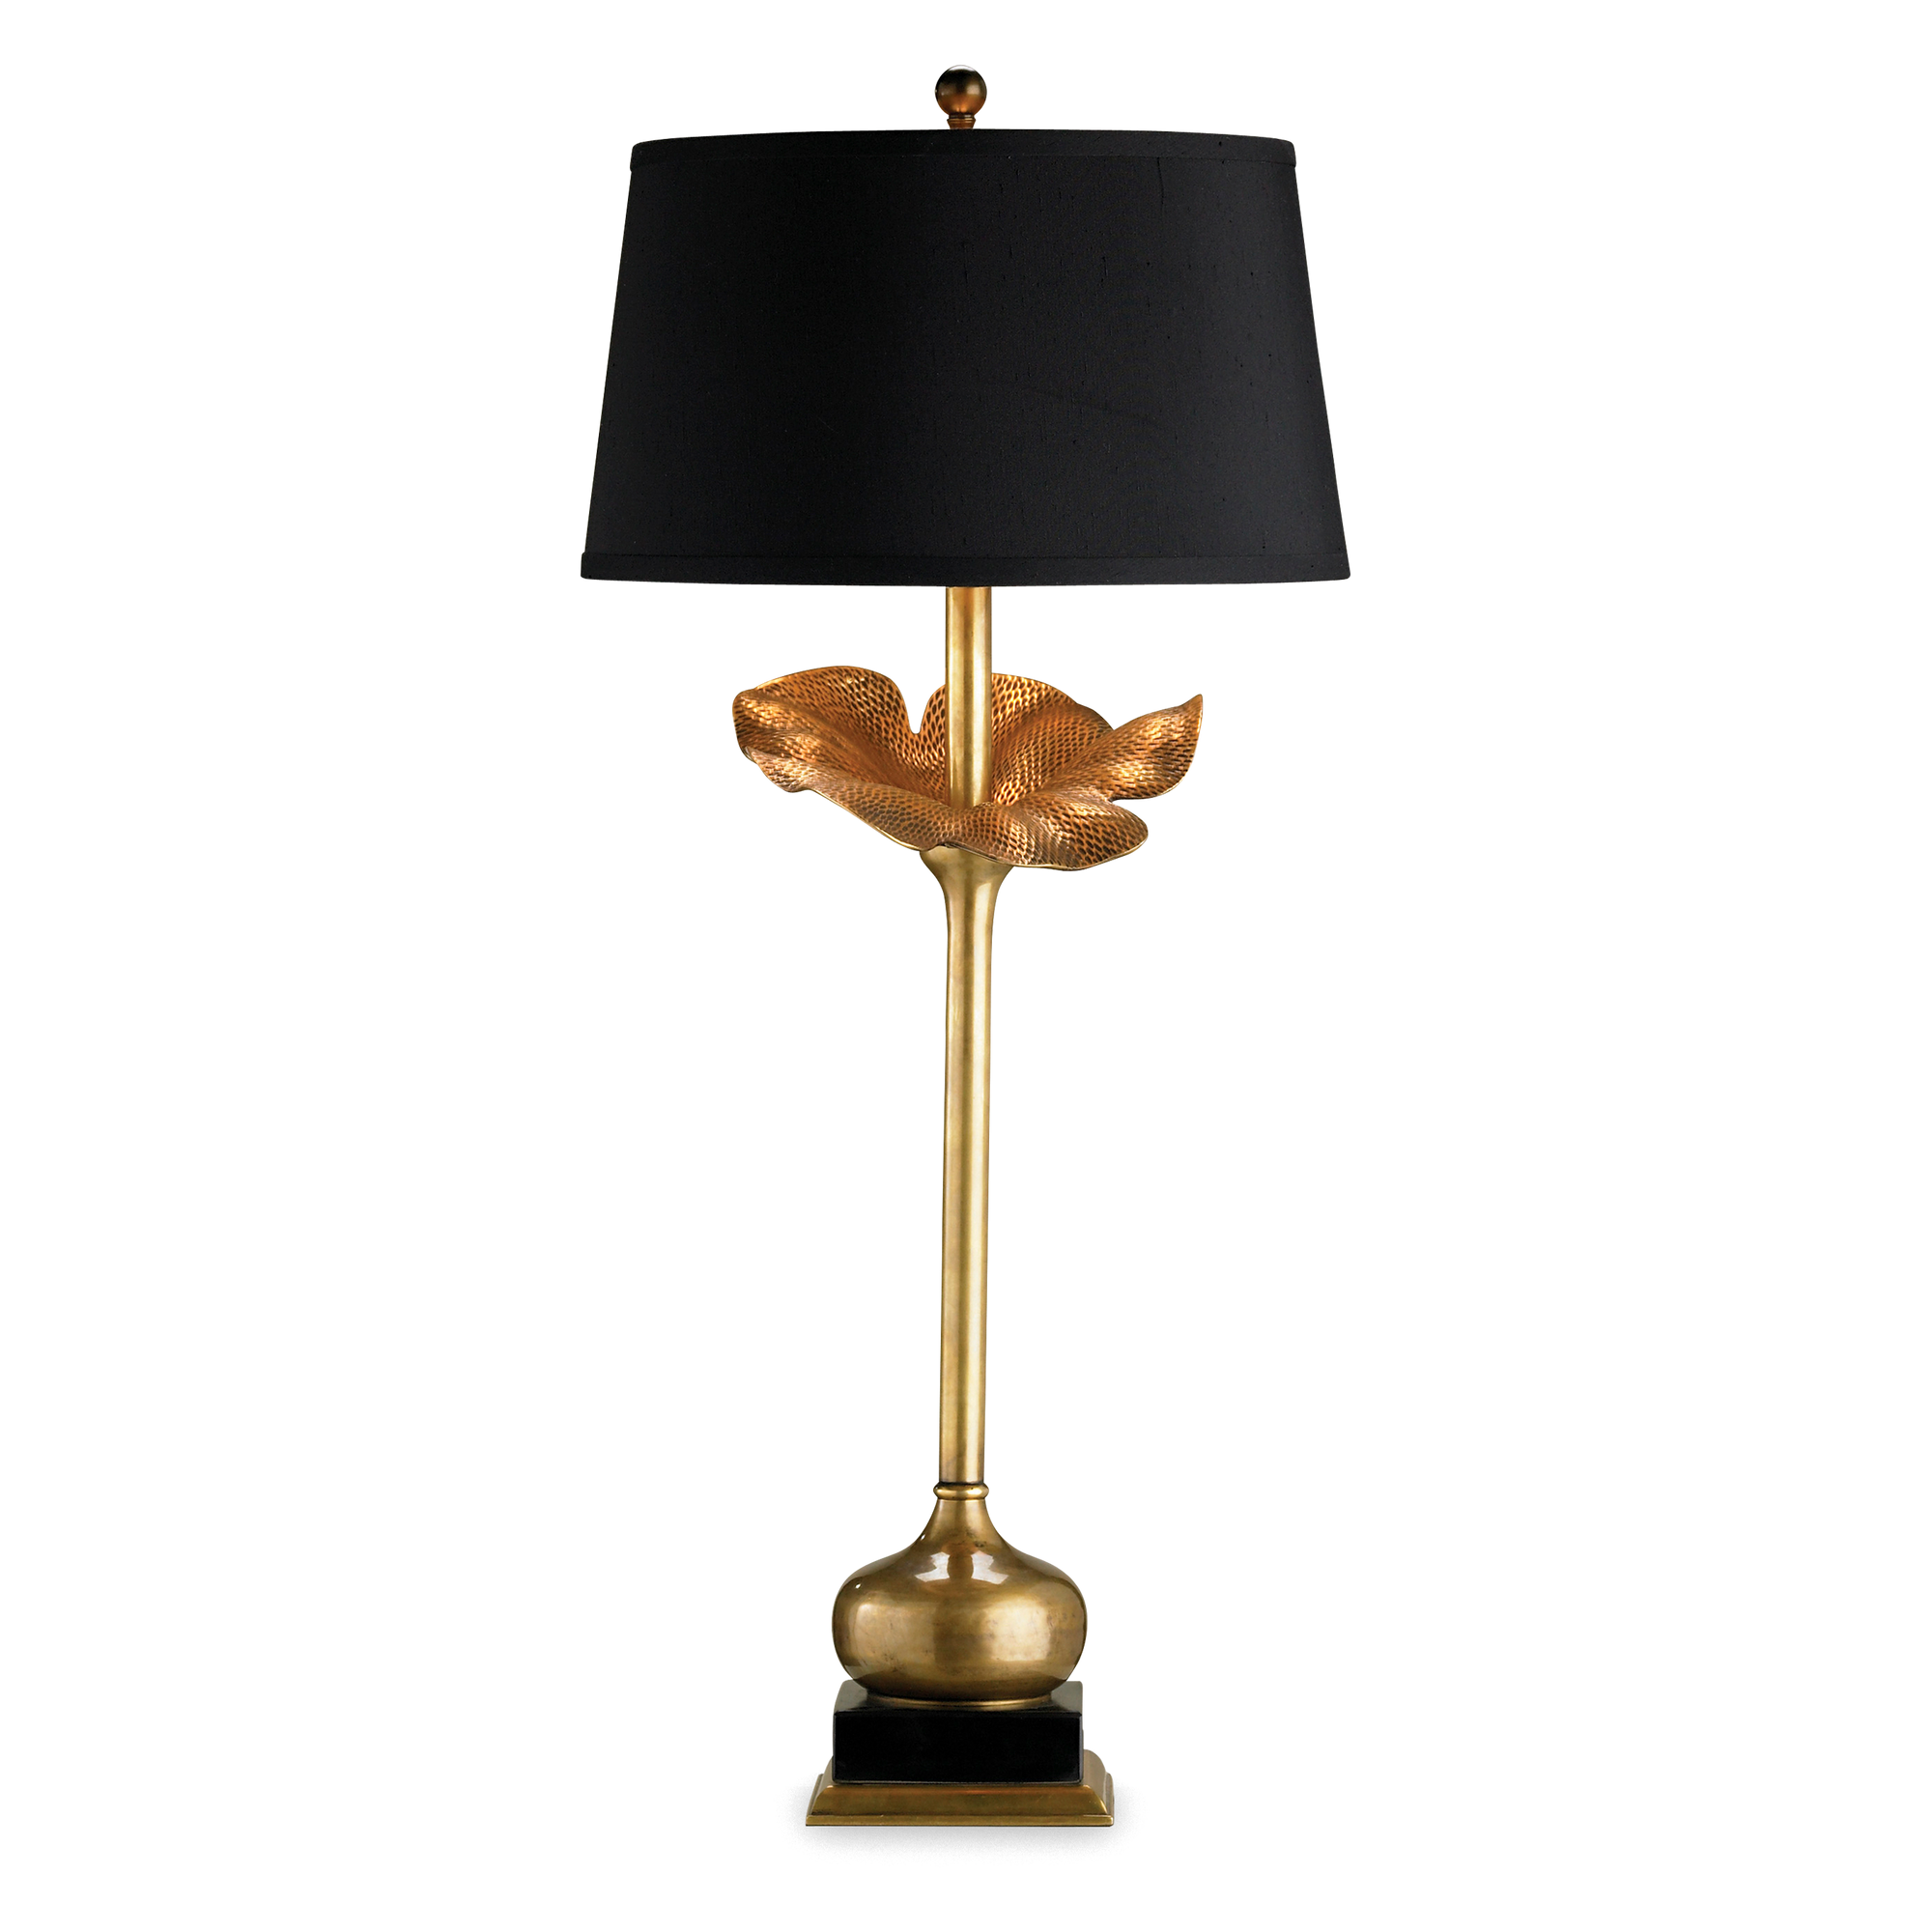 This lamp defines elegant simplicity and looks like a work of art.